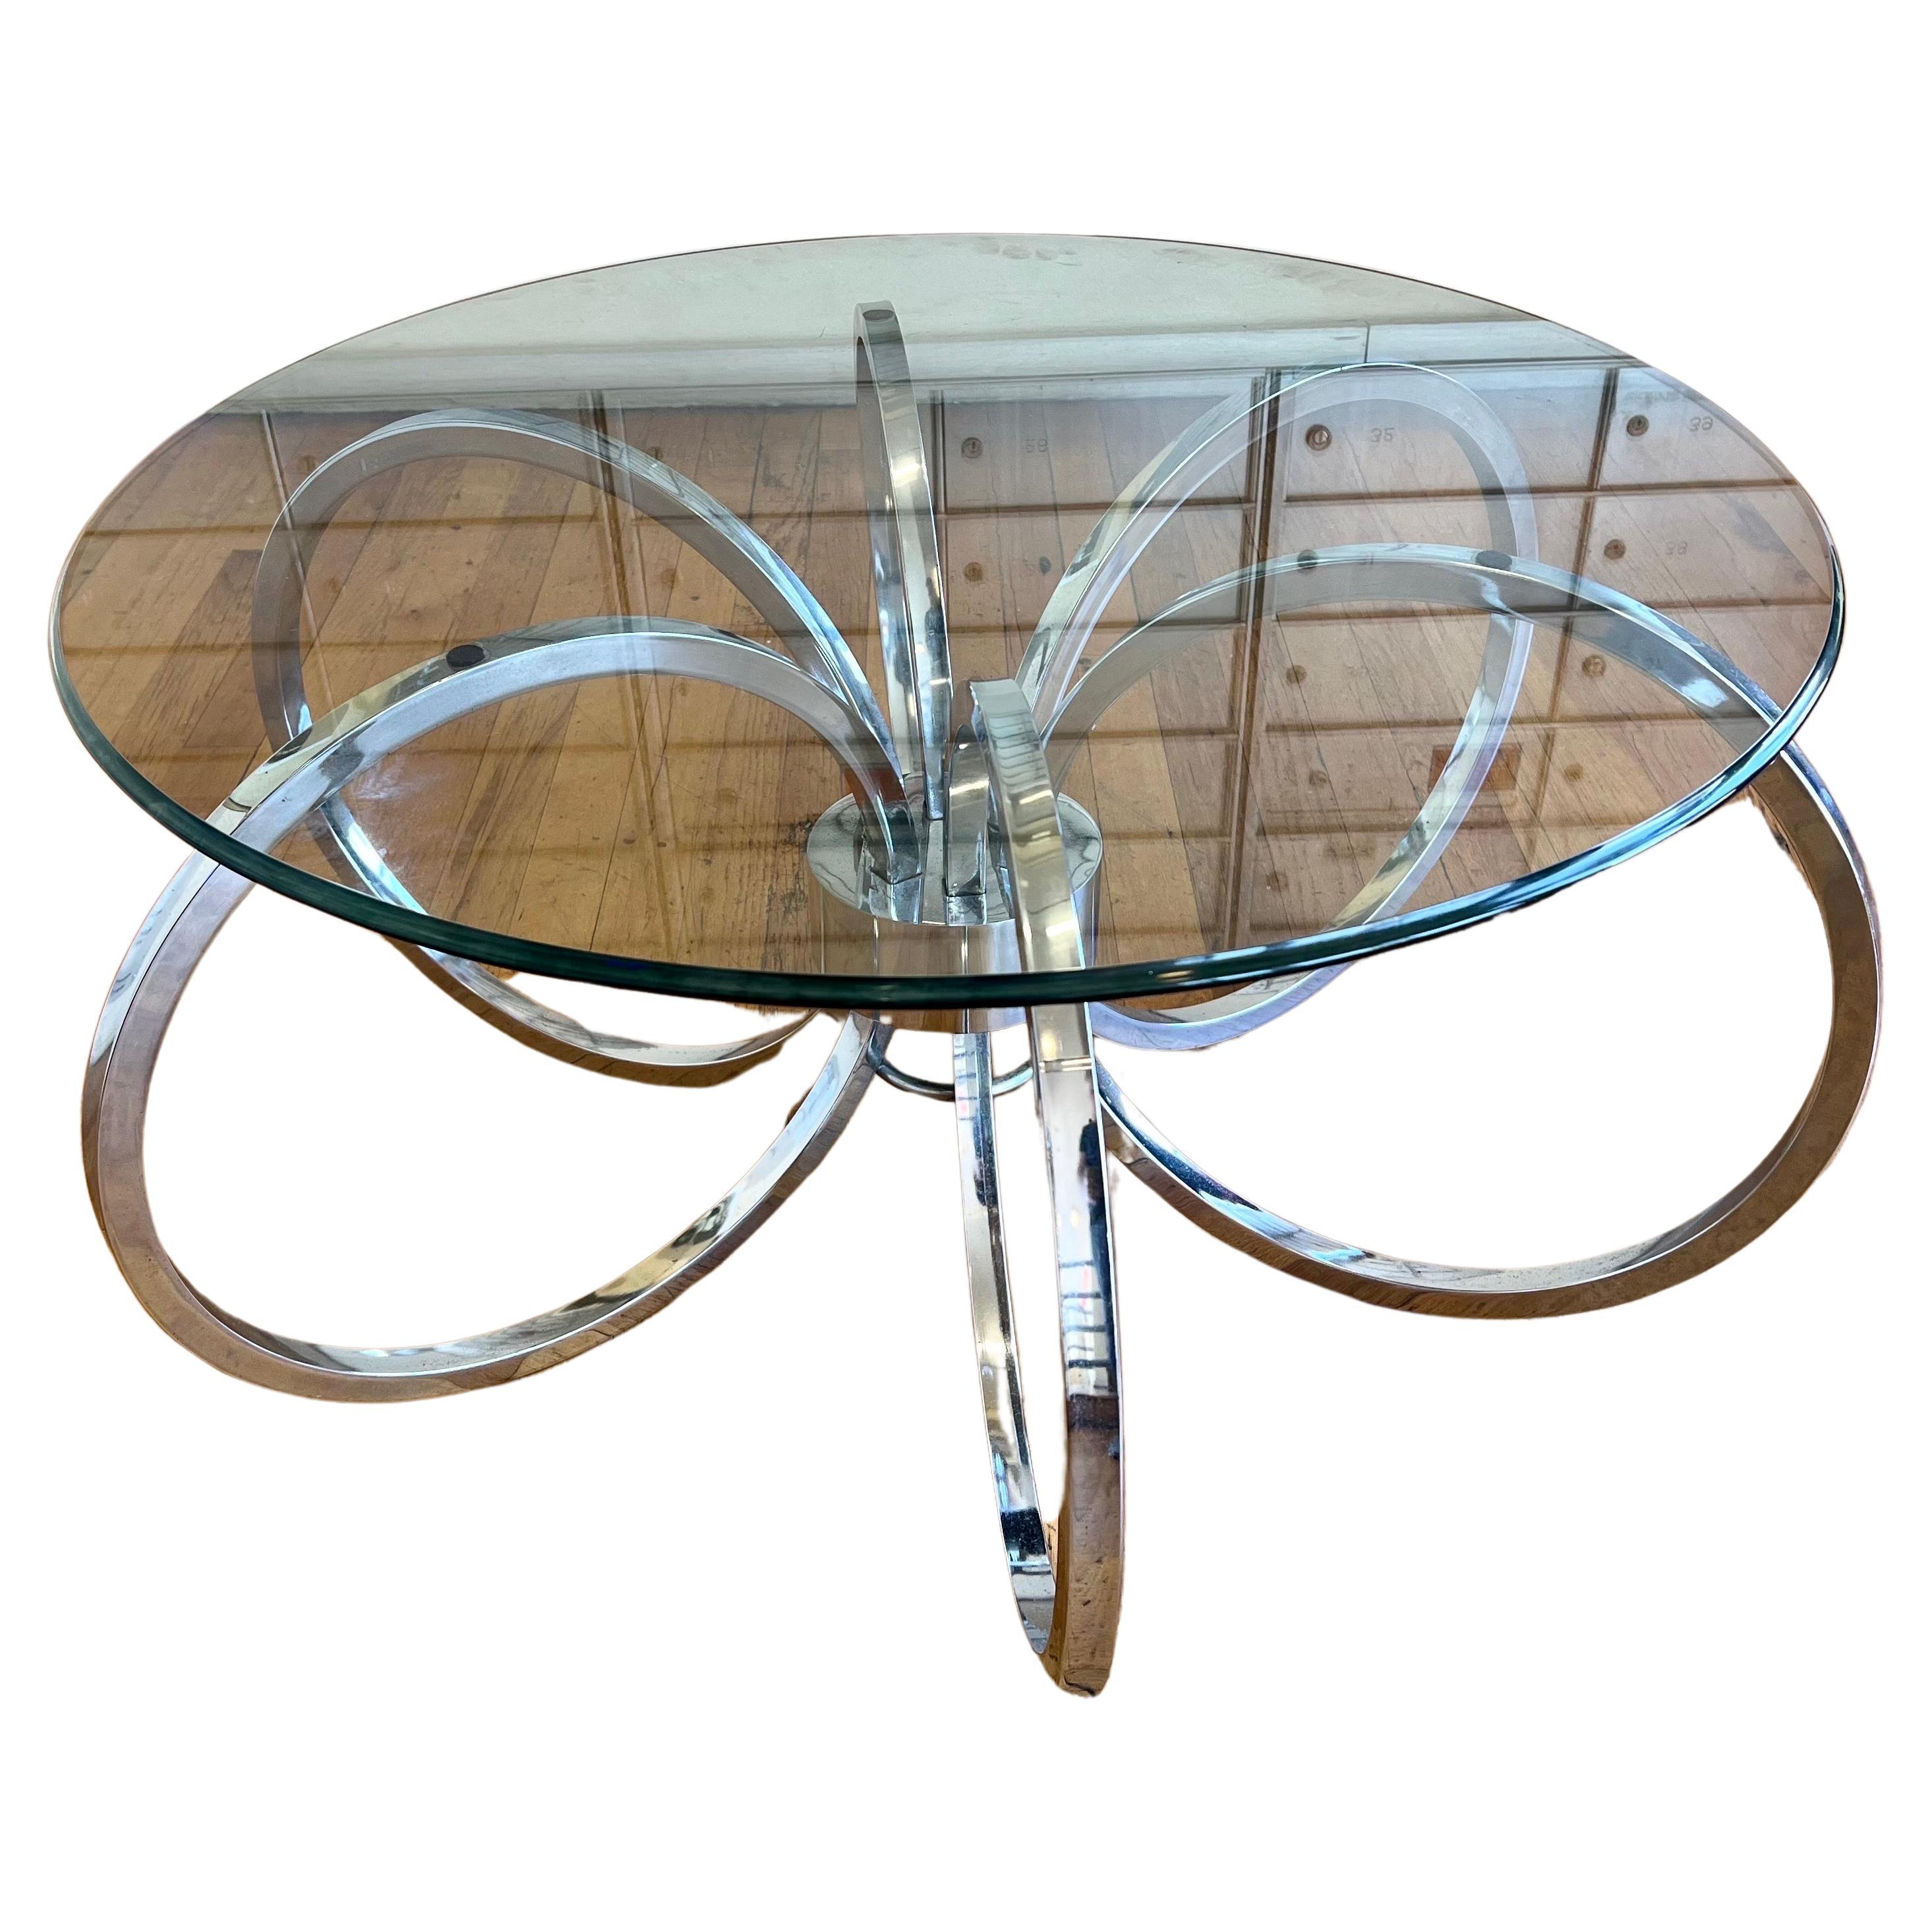 This very cool and unique coffee table in chrome was designed by Milo Baughman, for the Design Institute of America circa 1980s, we have polished the base, and we are including the glass top because of shipping reasons you can put a glass top or a